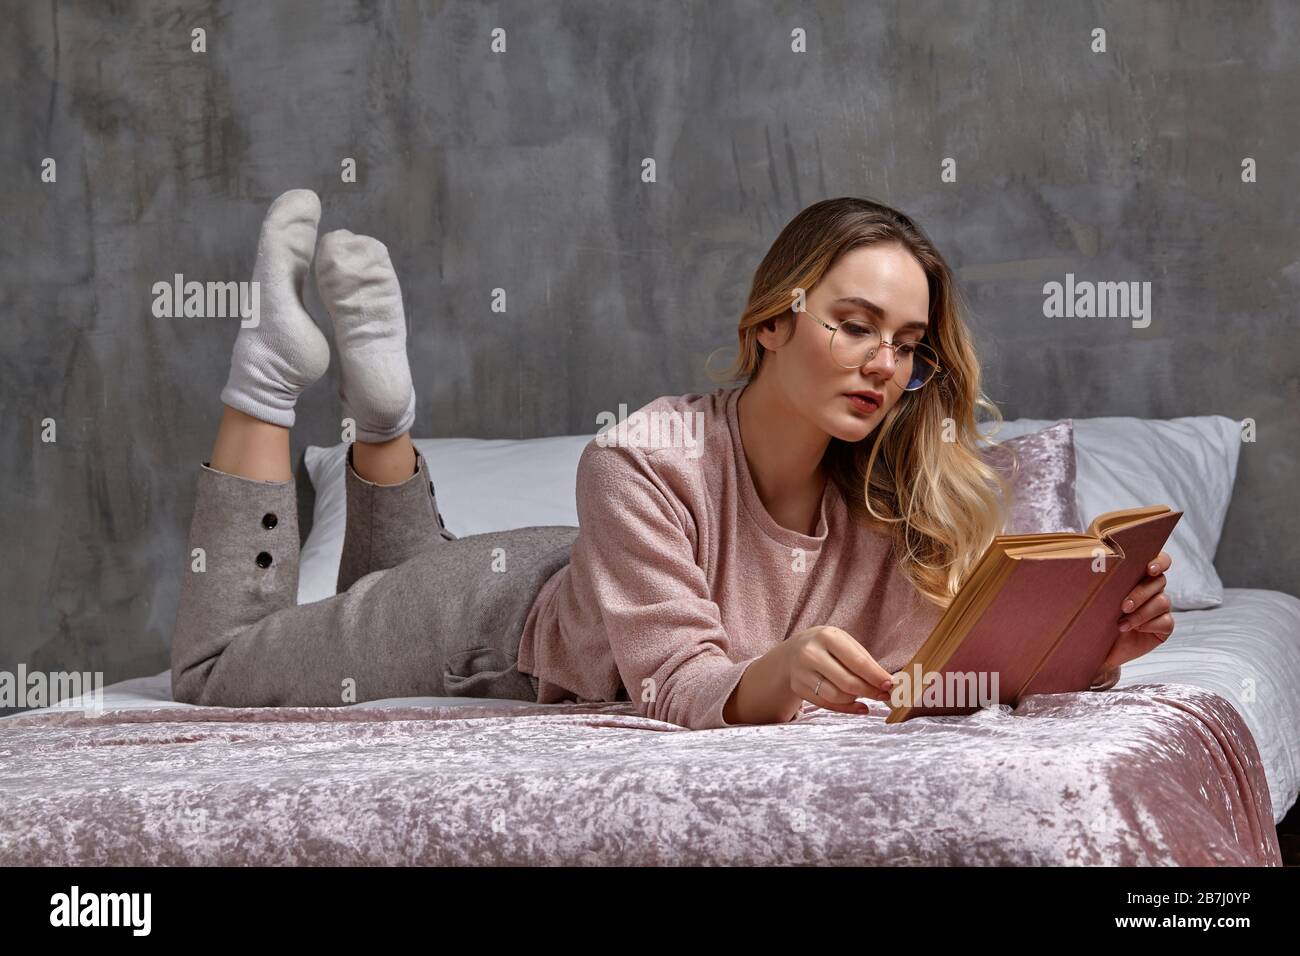 Blonde woman in glasses, casual clothing. She is laying on bed and reading book in bedroom. Student, blogger. Interior with gray wall. Close-up Stock Photo